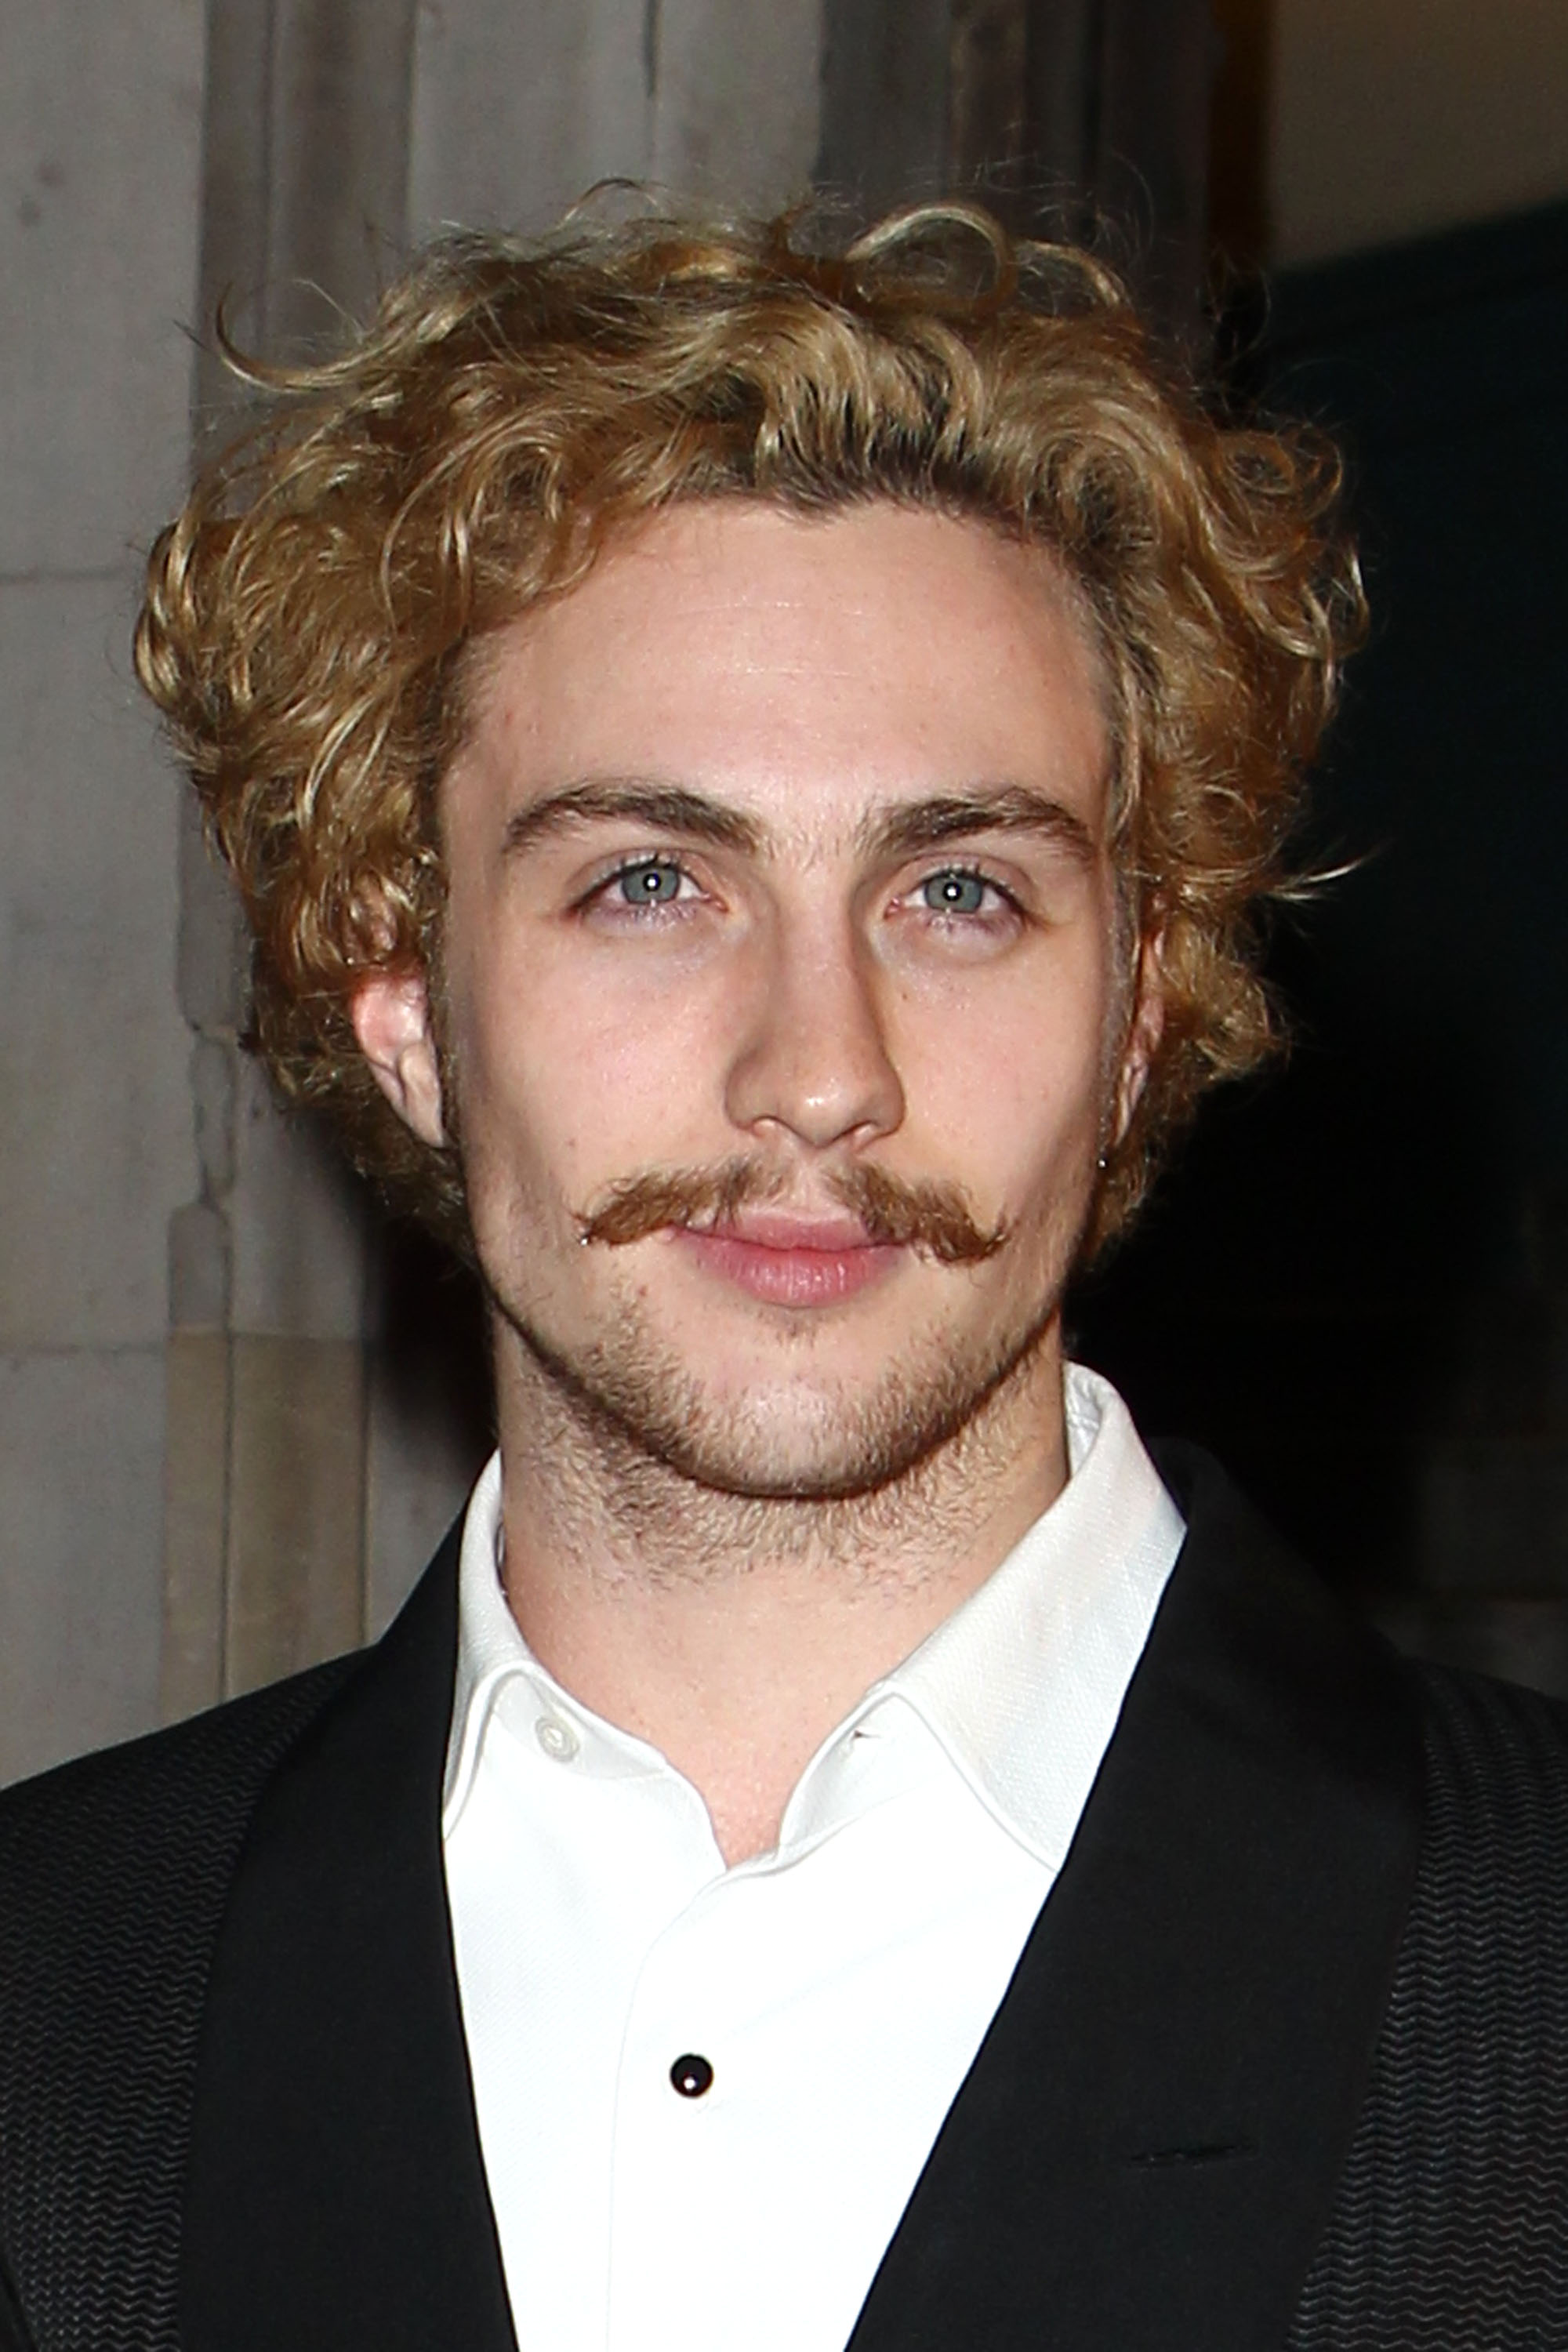 Aaron Taylor Johnson at the London film Festival in 2011 | Source: Getty Images